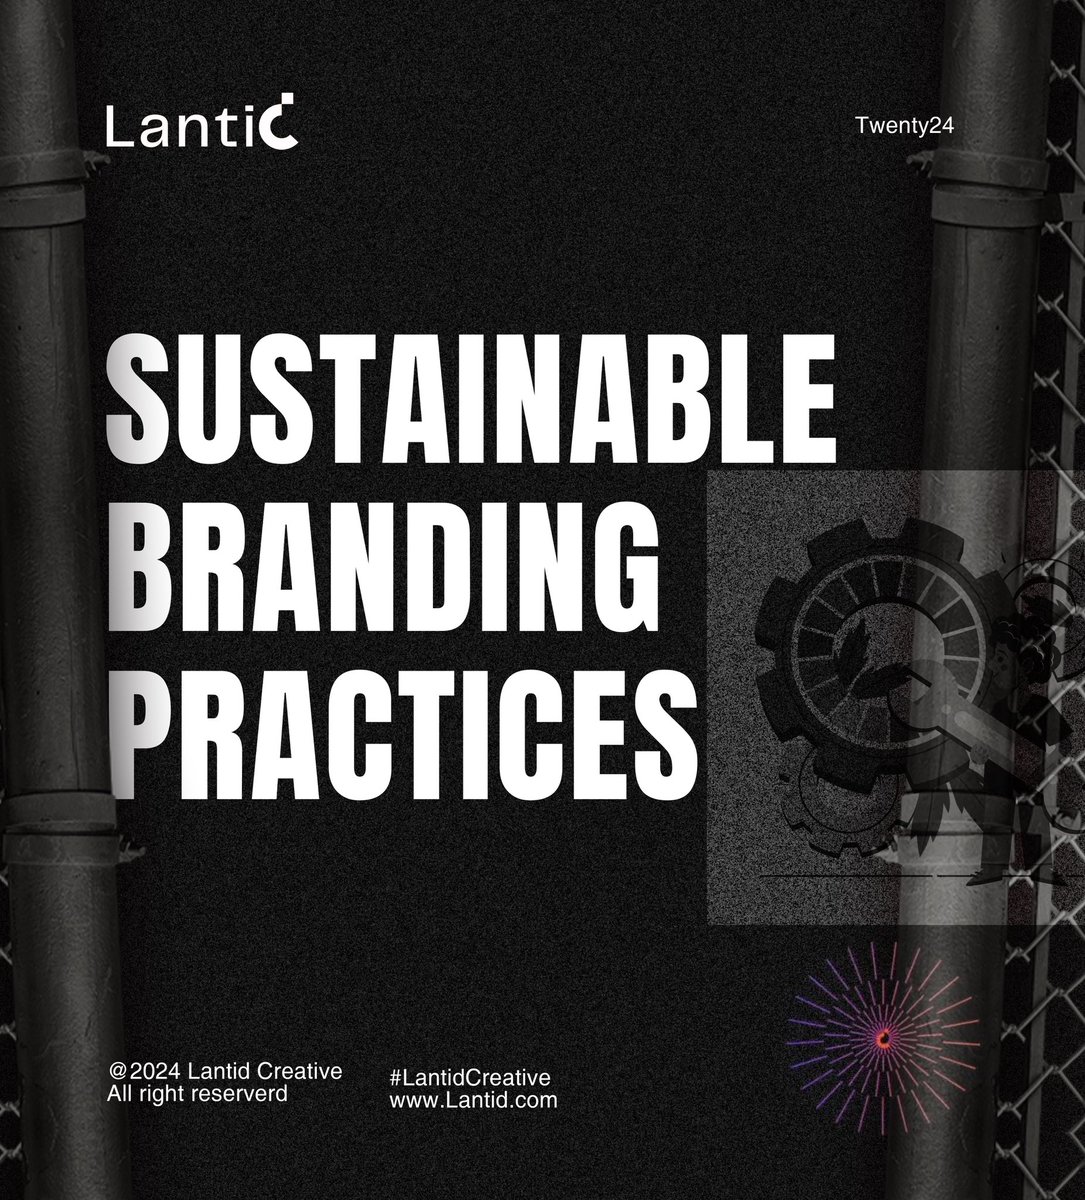 Learn from leaders like Patagonia and Allbirds, who prioritize eco-friendly practices, from sourcing to communication. Infuse sustainability into your brand to make a positive impact and build trust with your audience.

#lantidcreative #lantid #businesssolution #business #brand